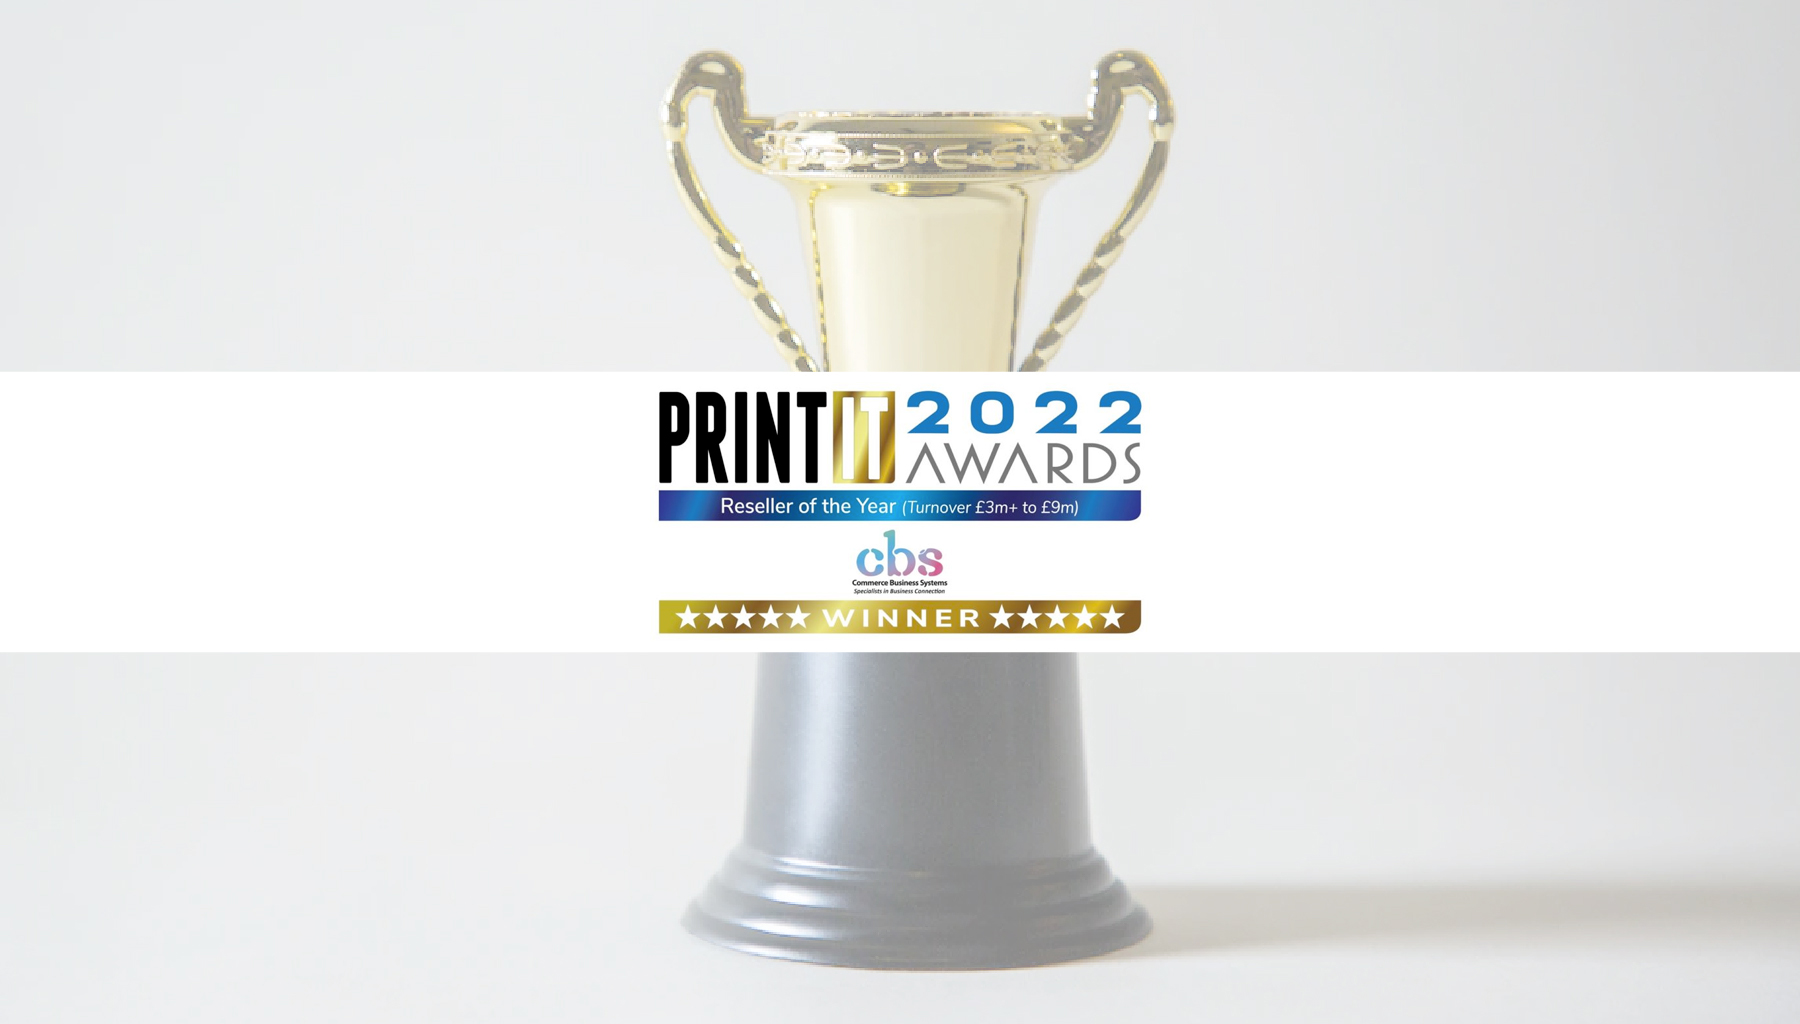 Commerce business Systems Ltd have won the Print IT reseller of the year 2022